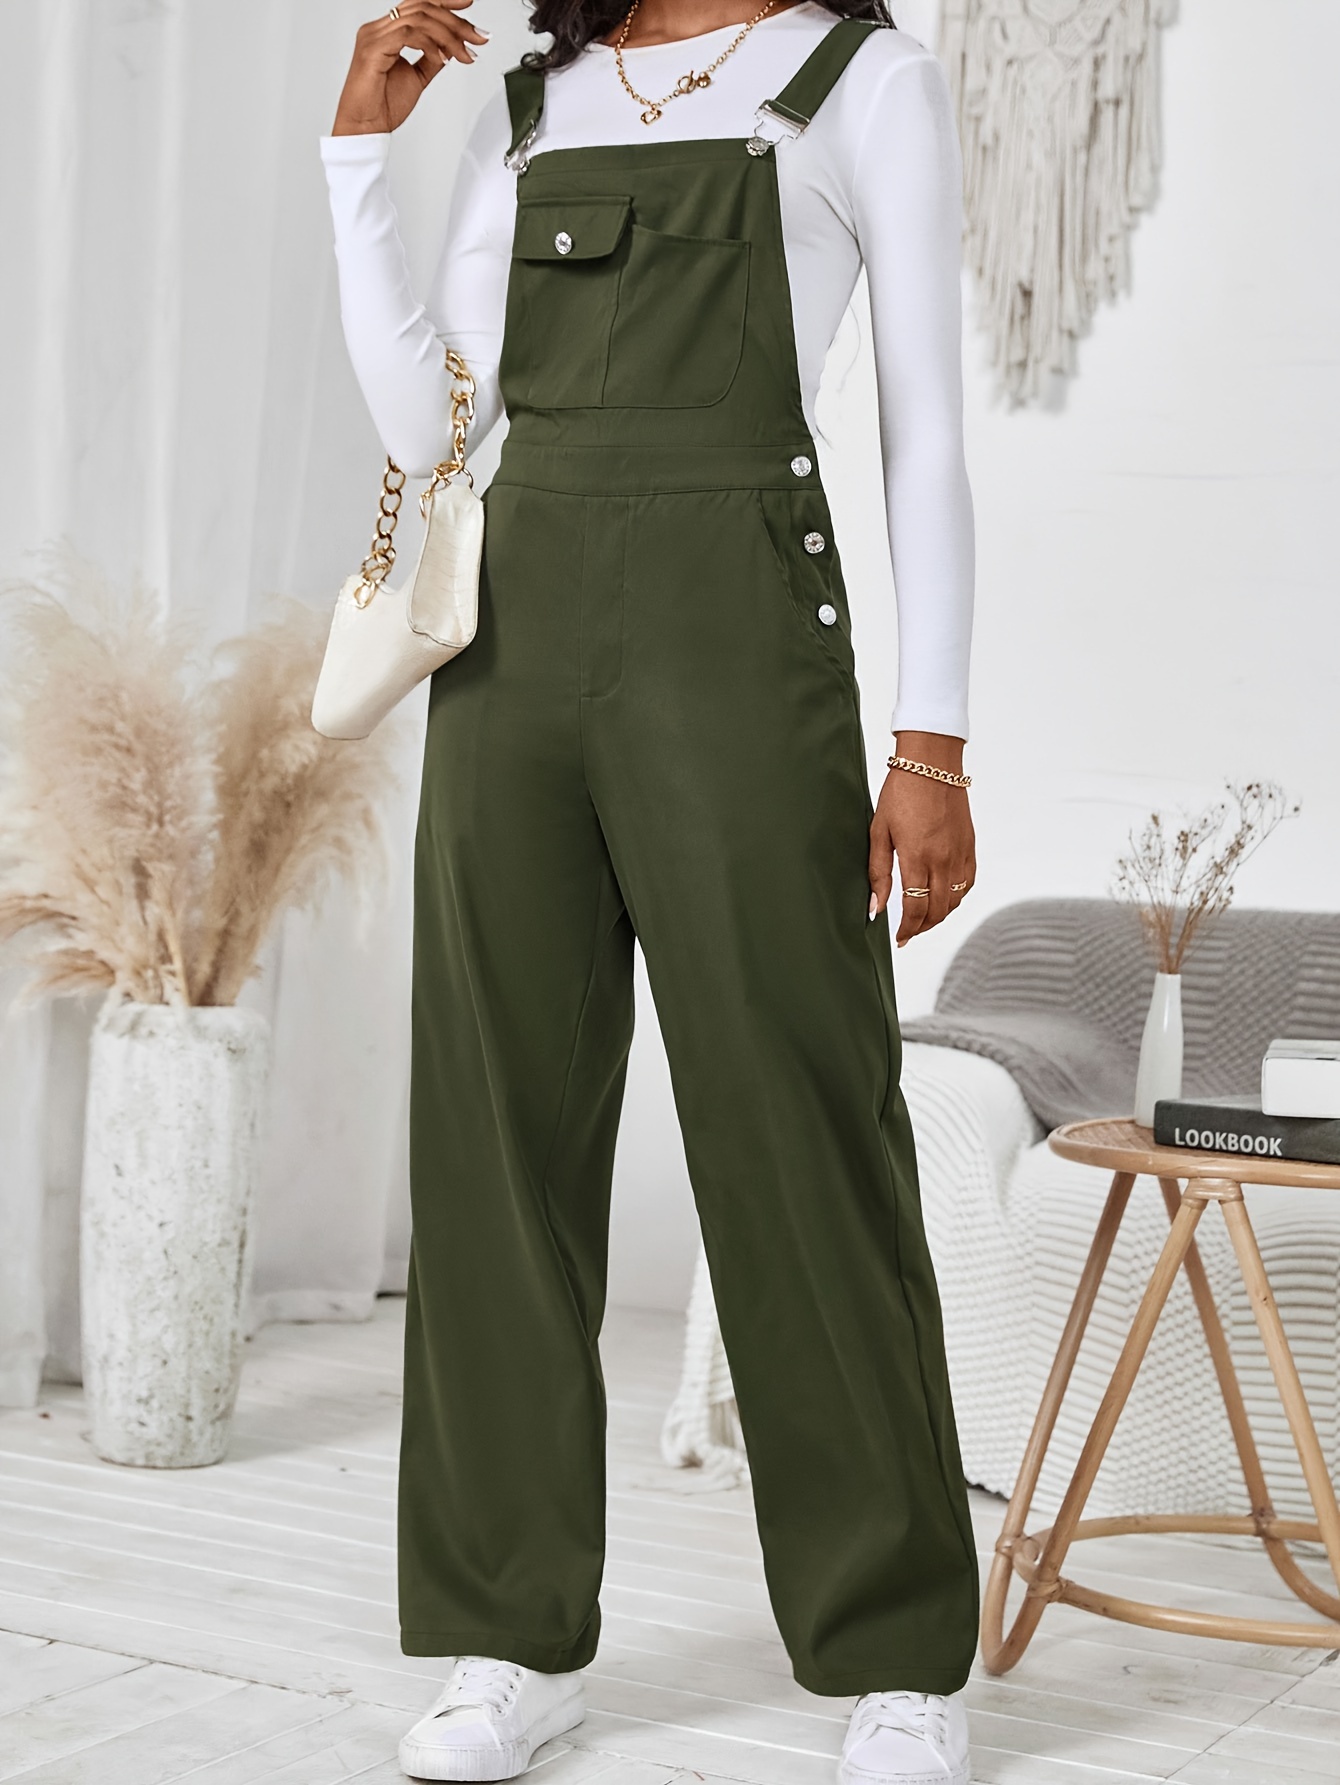 Women Summer Casual Strappy Overall Bib Pants Solid Color Plain Shorts  Jumpsuit Romper